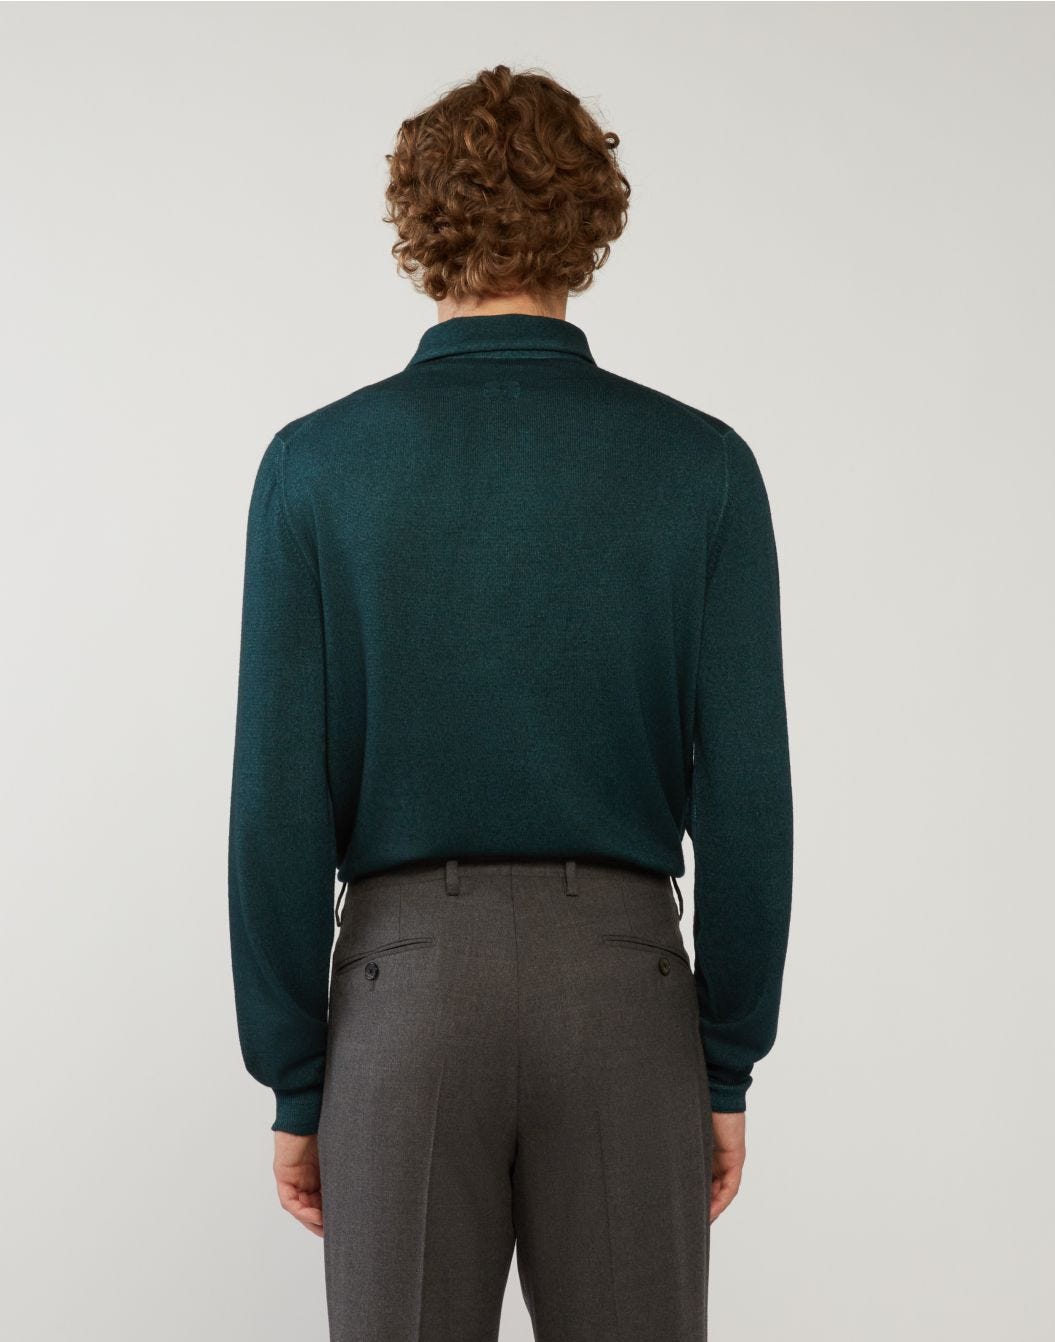 Polo shirt in pure green worsted wool